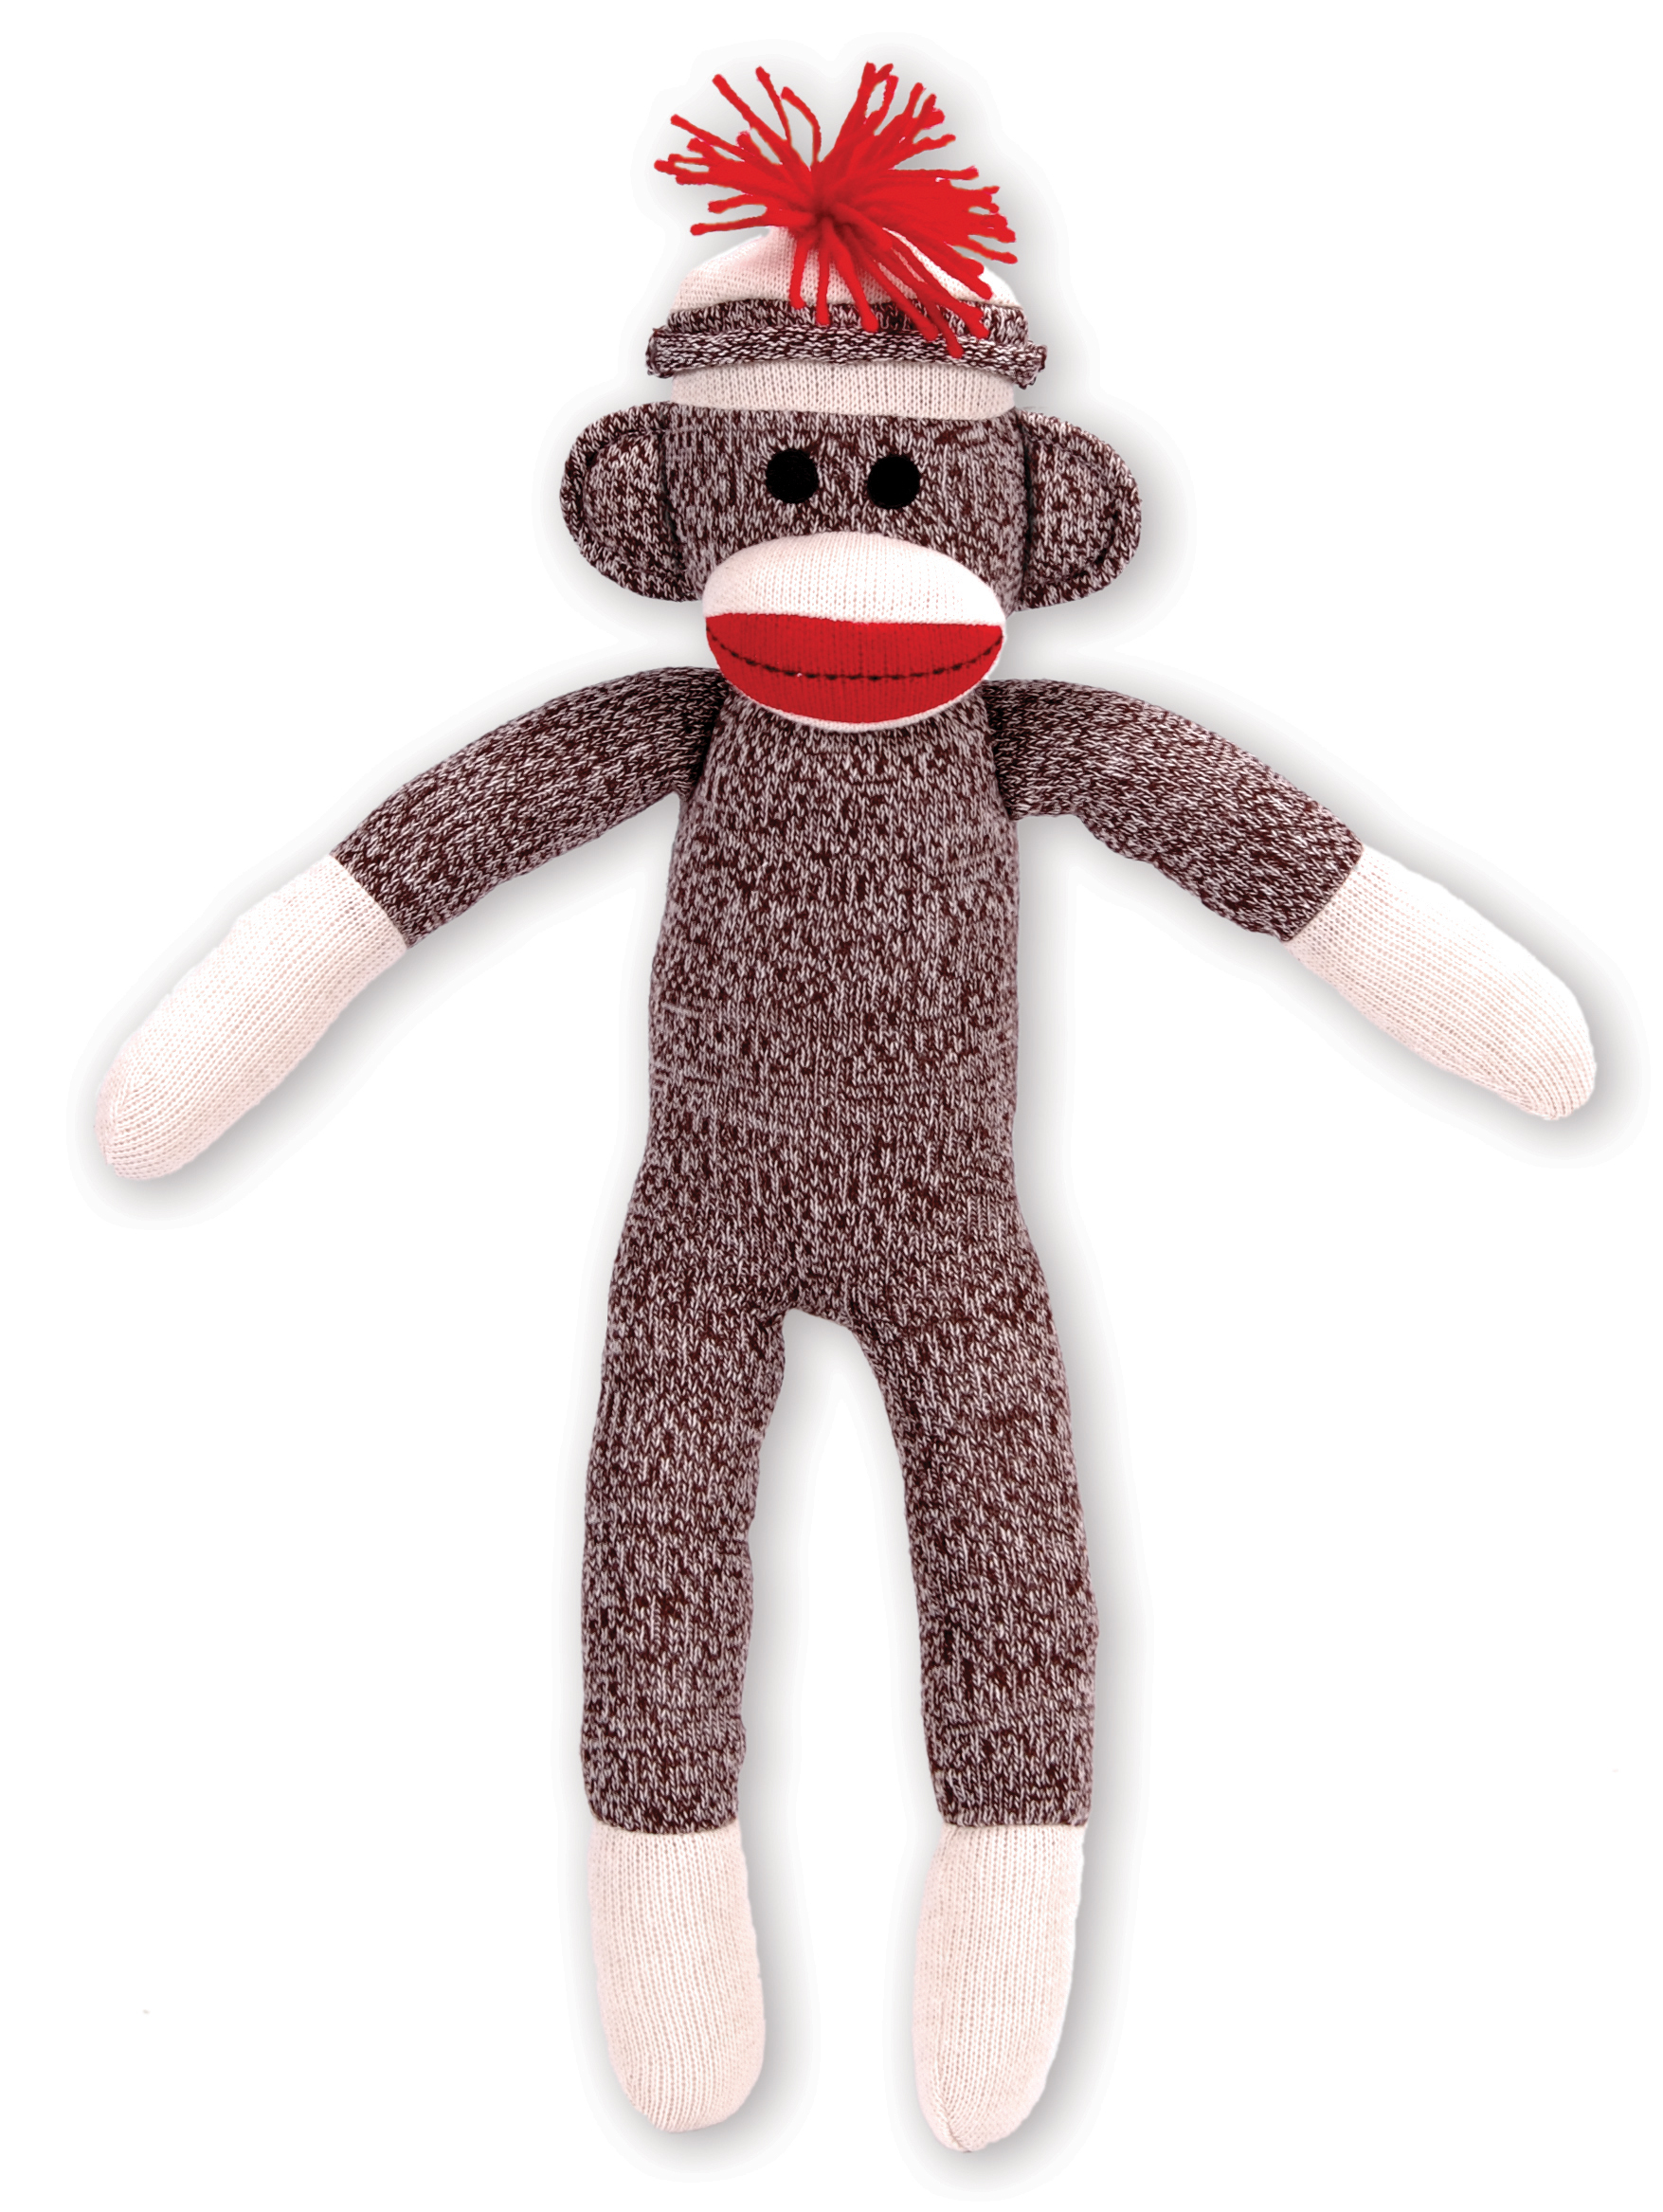 Sock Monkey The Traditional Which Is Brown With Red Lips